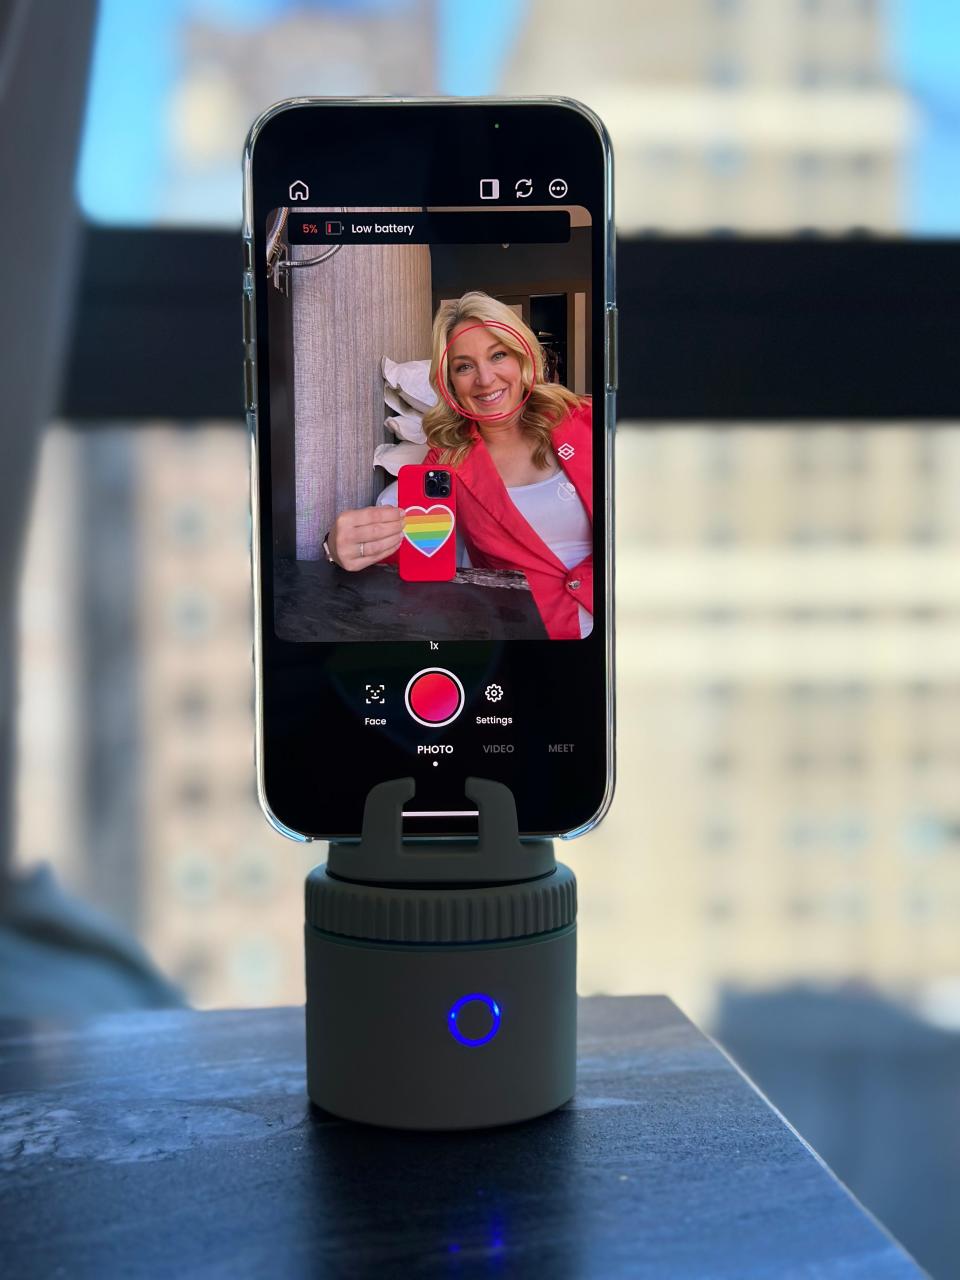 About half the size of soda can, you just charge this little auto-tracking smartphone mount up, pair it with an app, and it uses AI motion tracking to follow you around and keep you in frame.